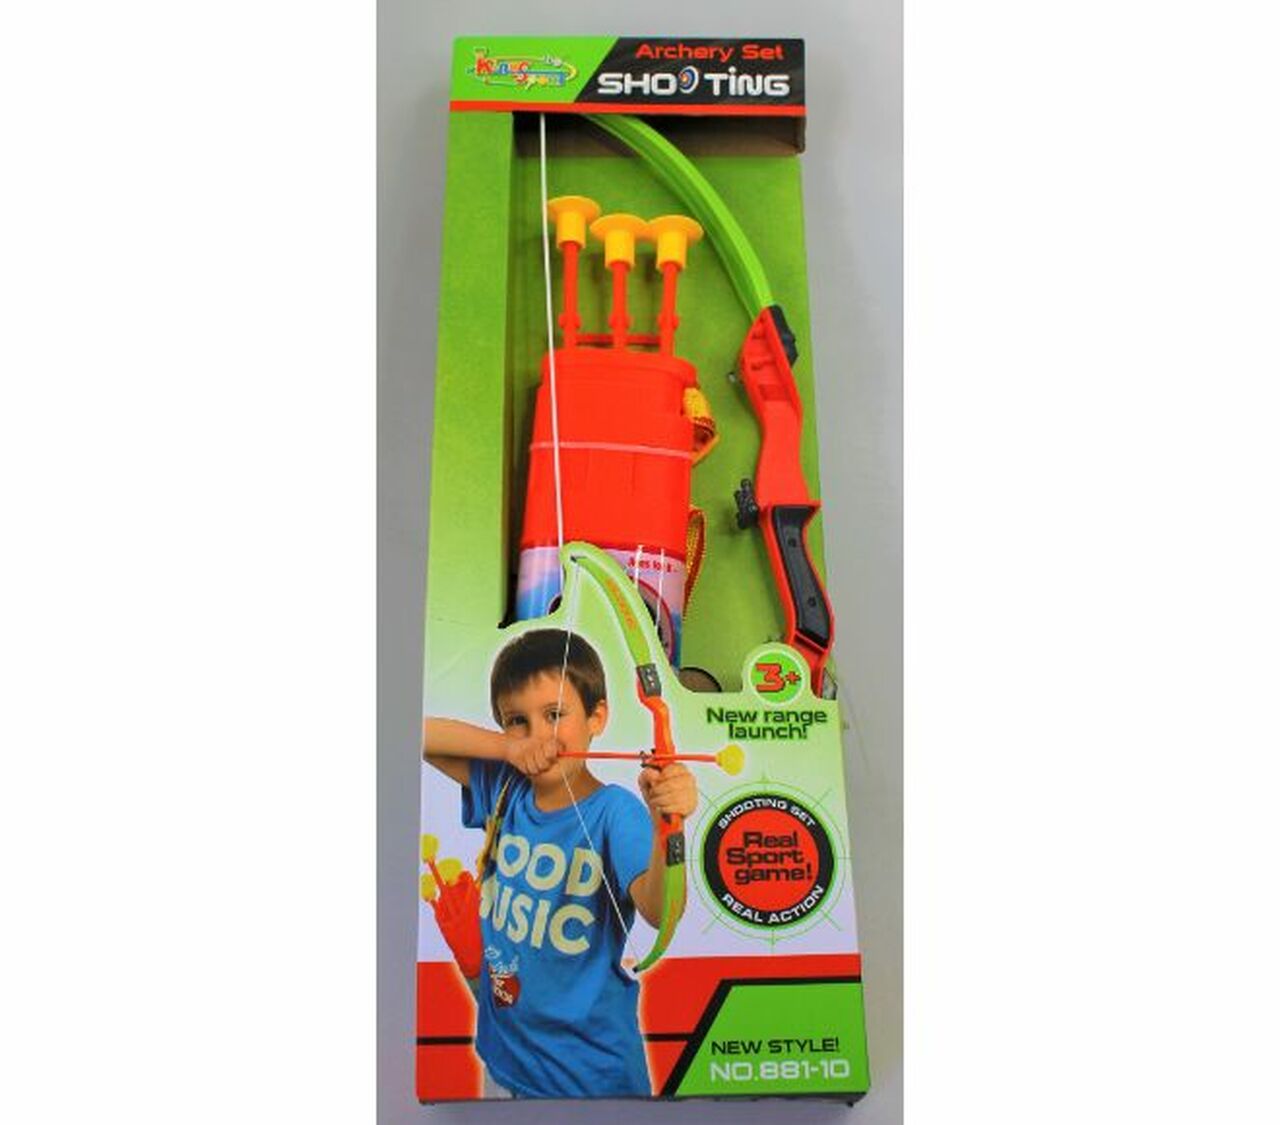 King Sport Small Archery Set with Quiver